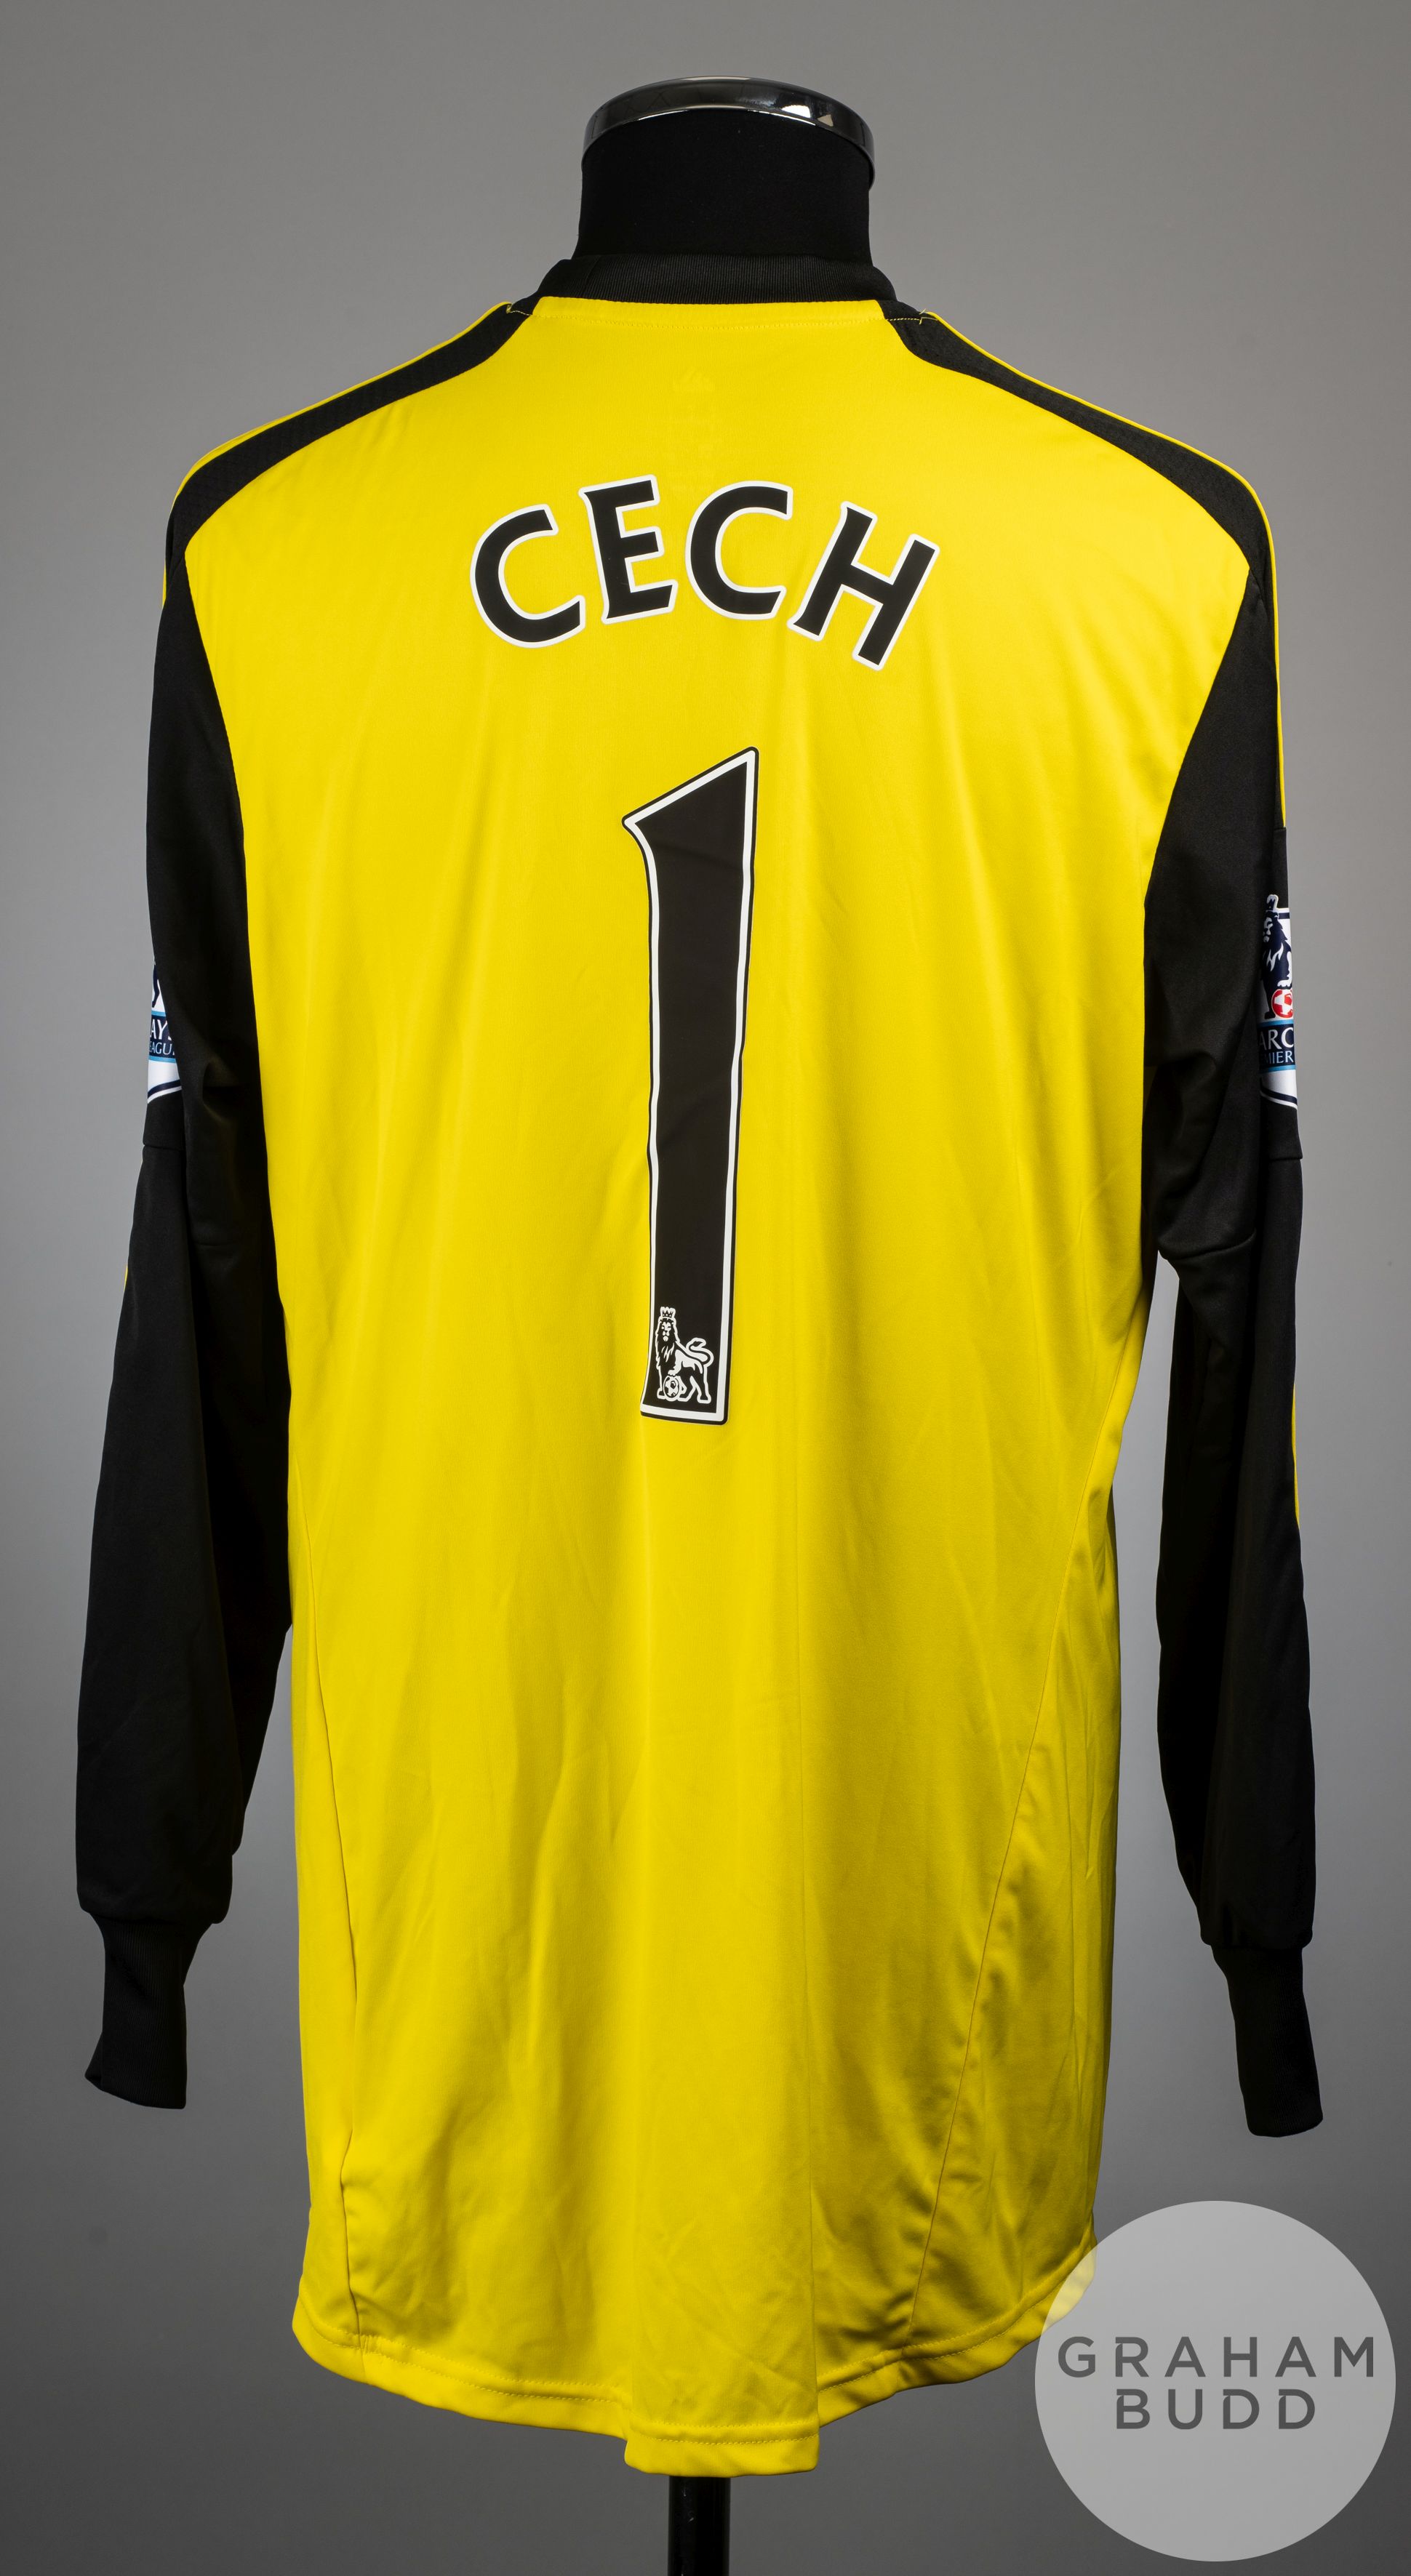 Petr Cech yellow and black No.1 Chelsea match worn long-sleeved shirt, 2013-14 - Image 2 of 2